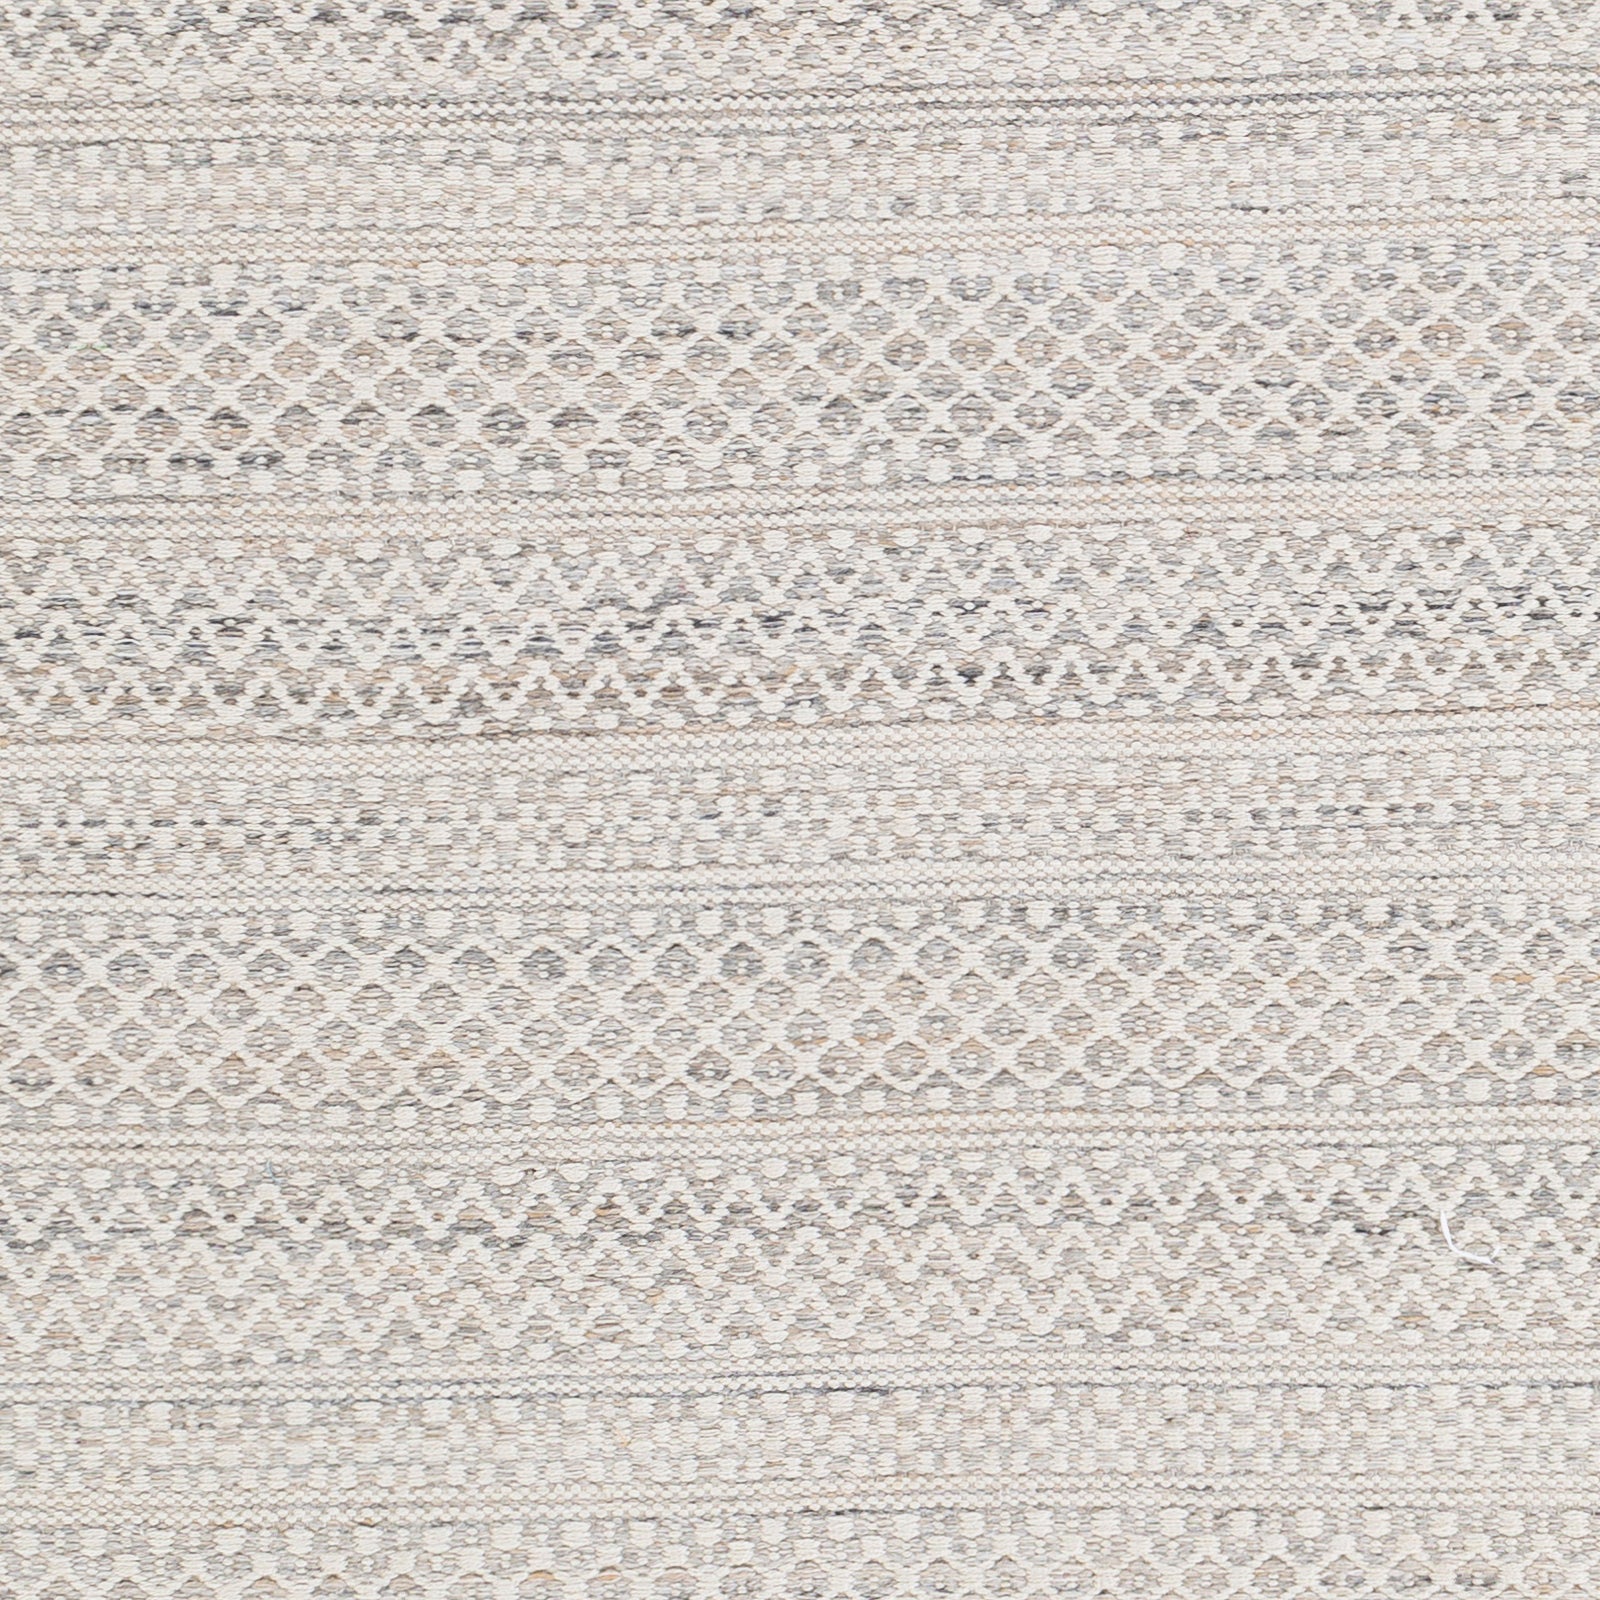 The Catalina Rug is hand woven from 100% PET yarn. 